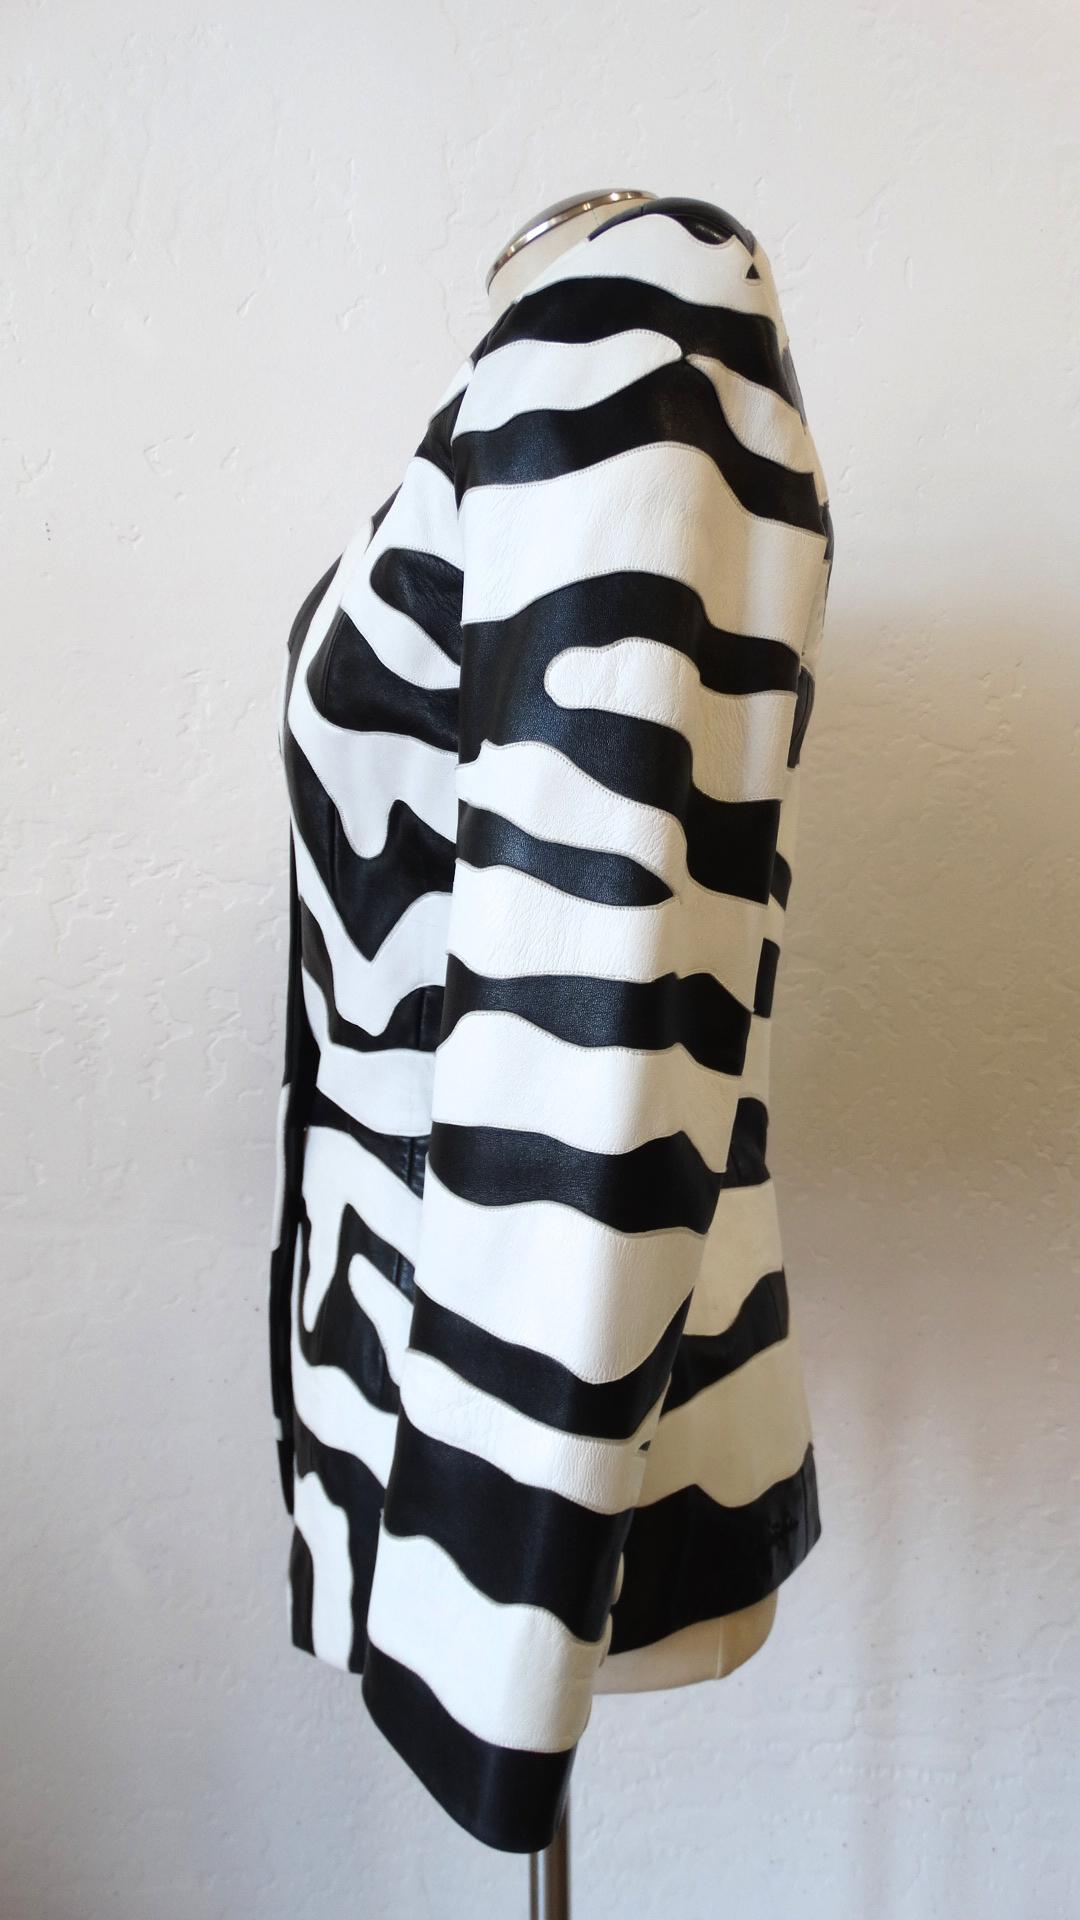 Feel All Of The 80s Vibes In This Amazing Jean Claude Jacket! Features pieced leather applique in black and white zebra stripes and a hidden zebra face, complete with a detailed ear. Shoulder pads and a nipped-in waist create a strong silhouette